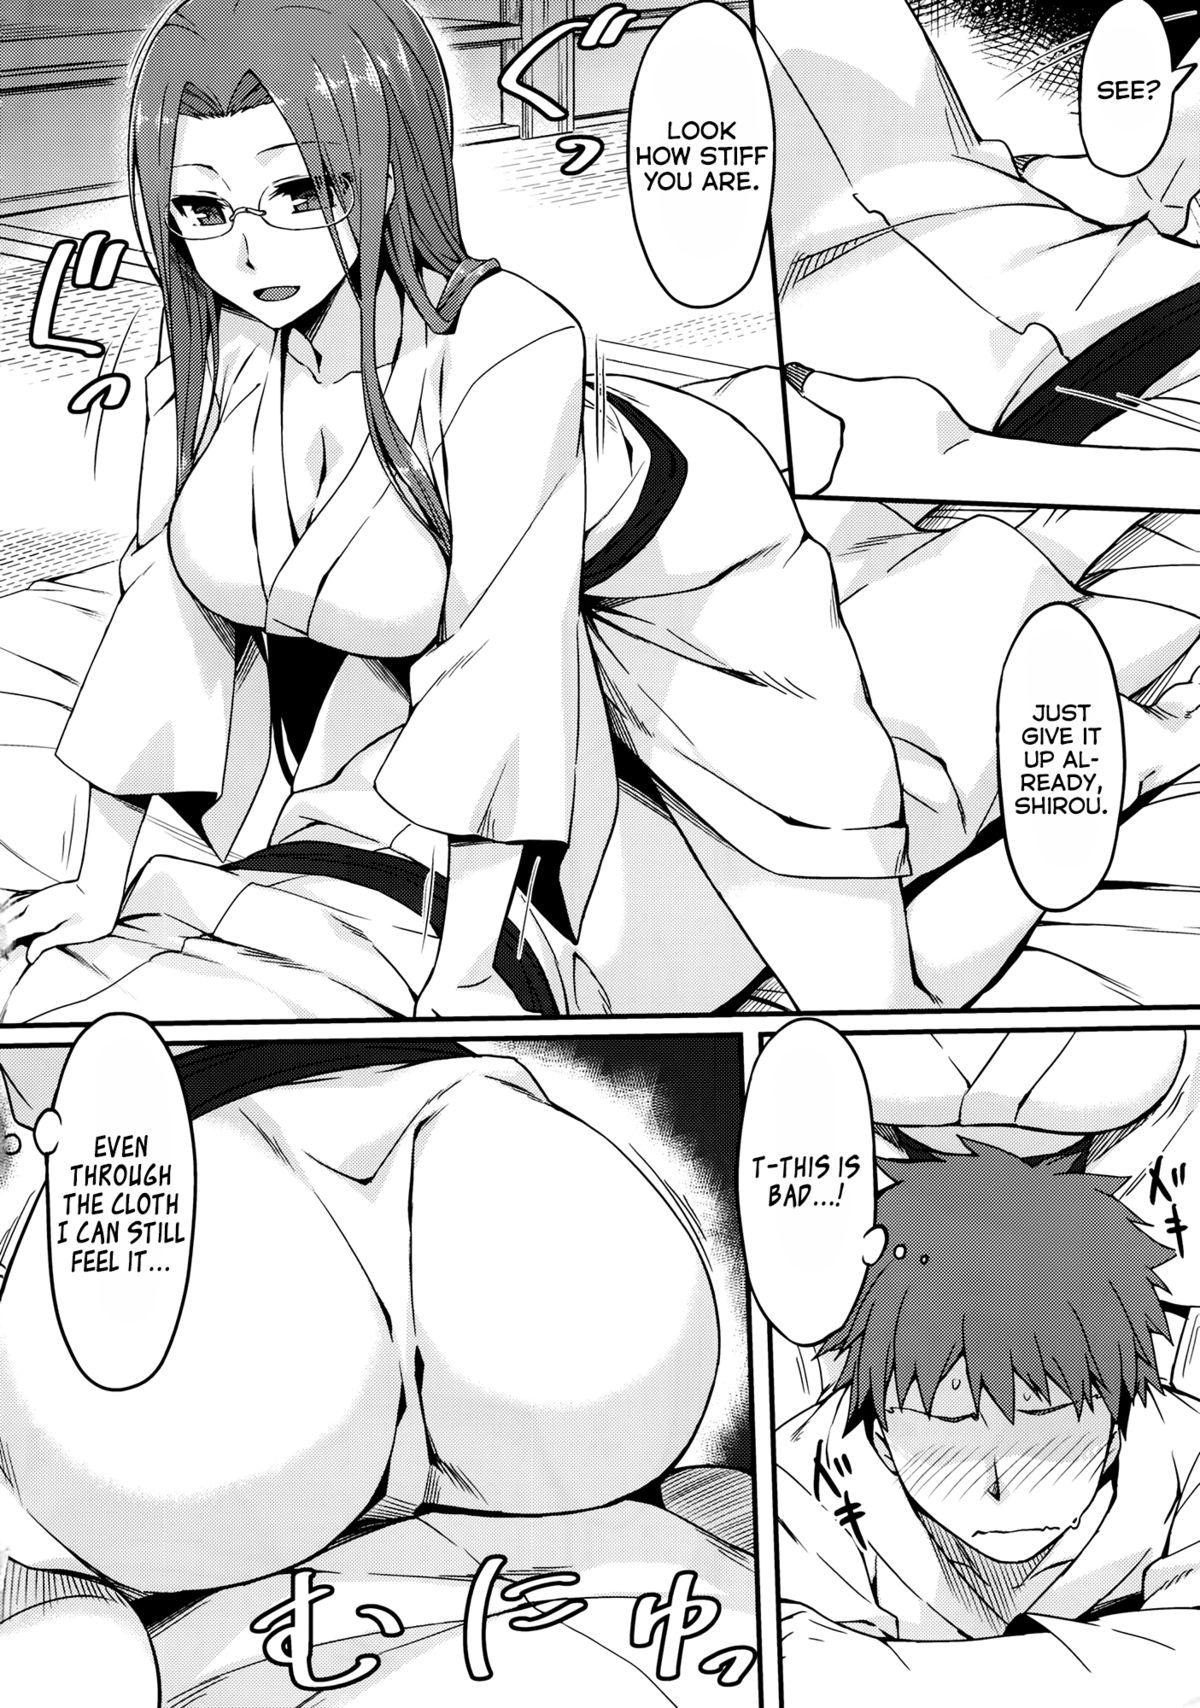 Best Blowjob (C88) [S.S.L (Yanagi)] Rider-san to Onsen Yado. Sonogo | Hot Spring Inn With Rider-san. After Story (Fate/stay night) [English] [Facedesk] - Fate stay night Cut - Page 4